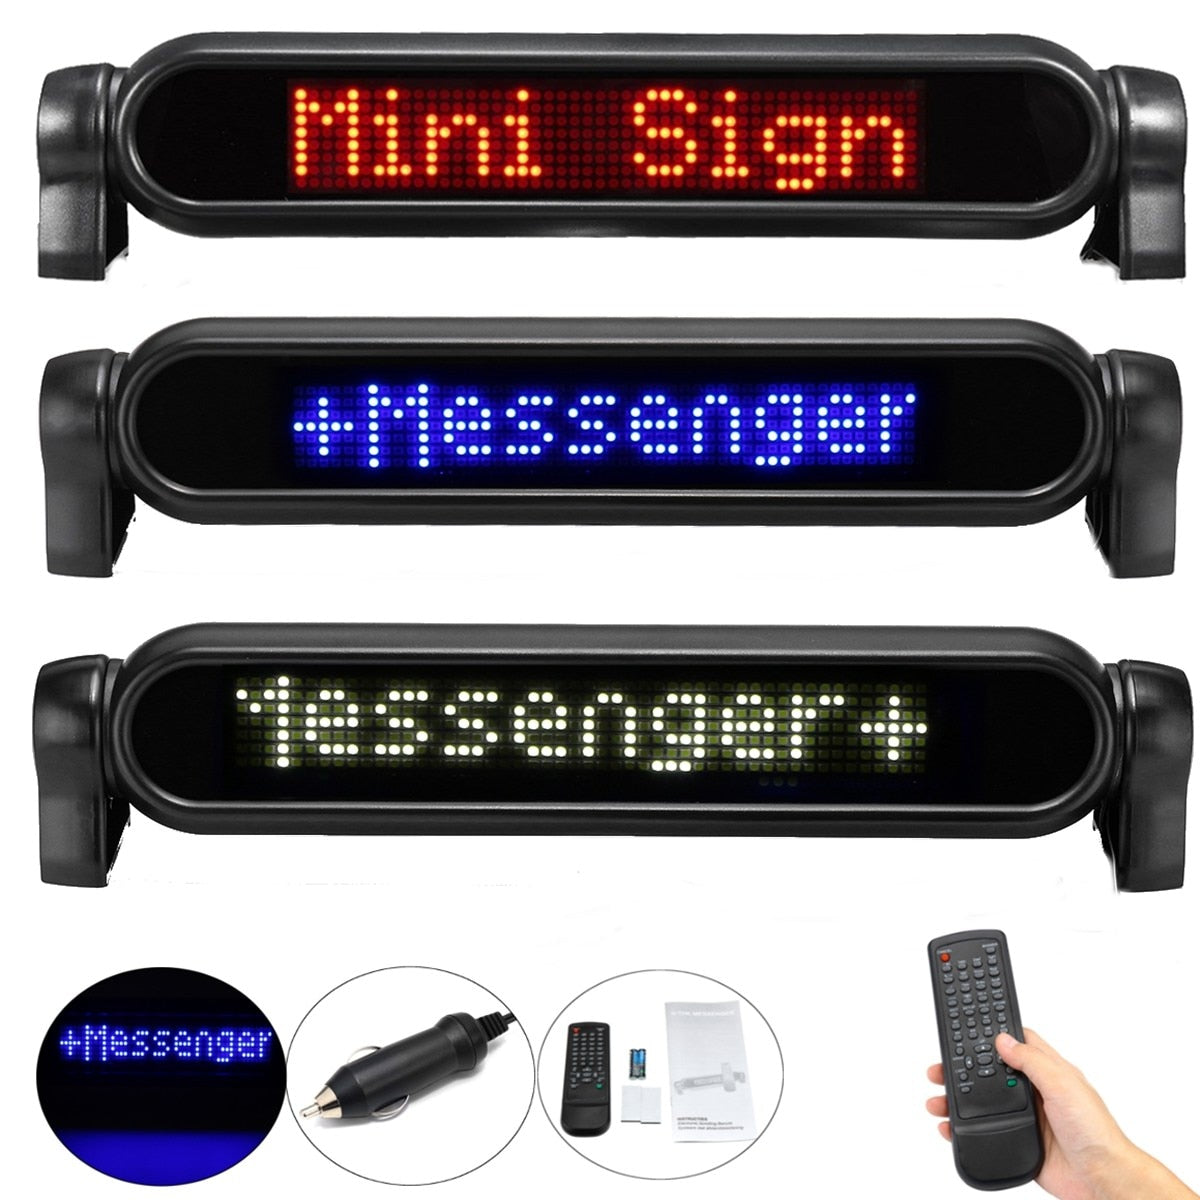 LED Programmable Electronic Car Display Moving Message Sign